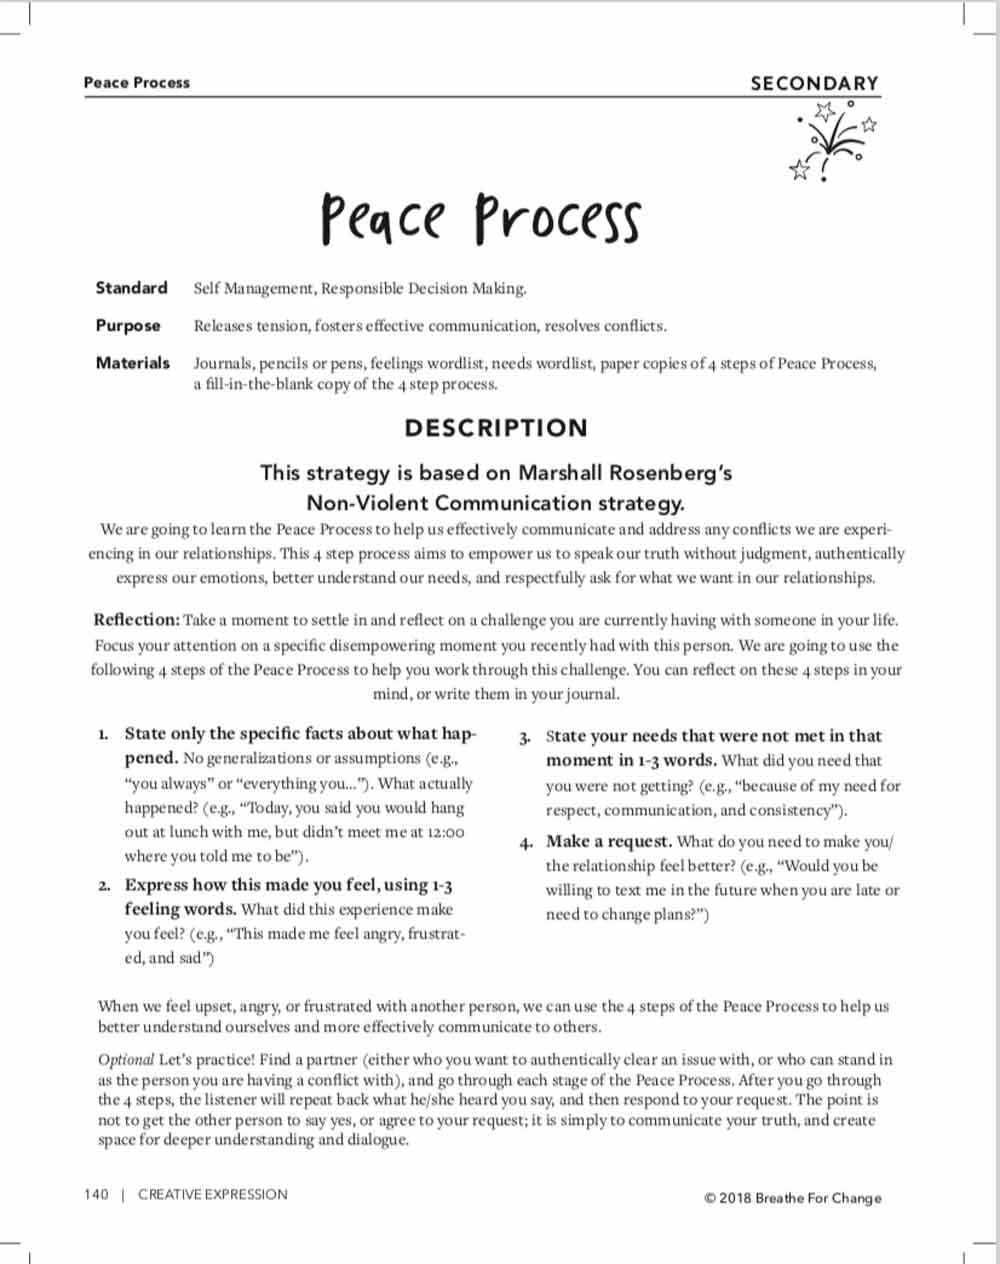 A conflict resolution activity for secondary students 